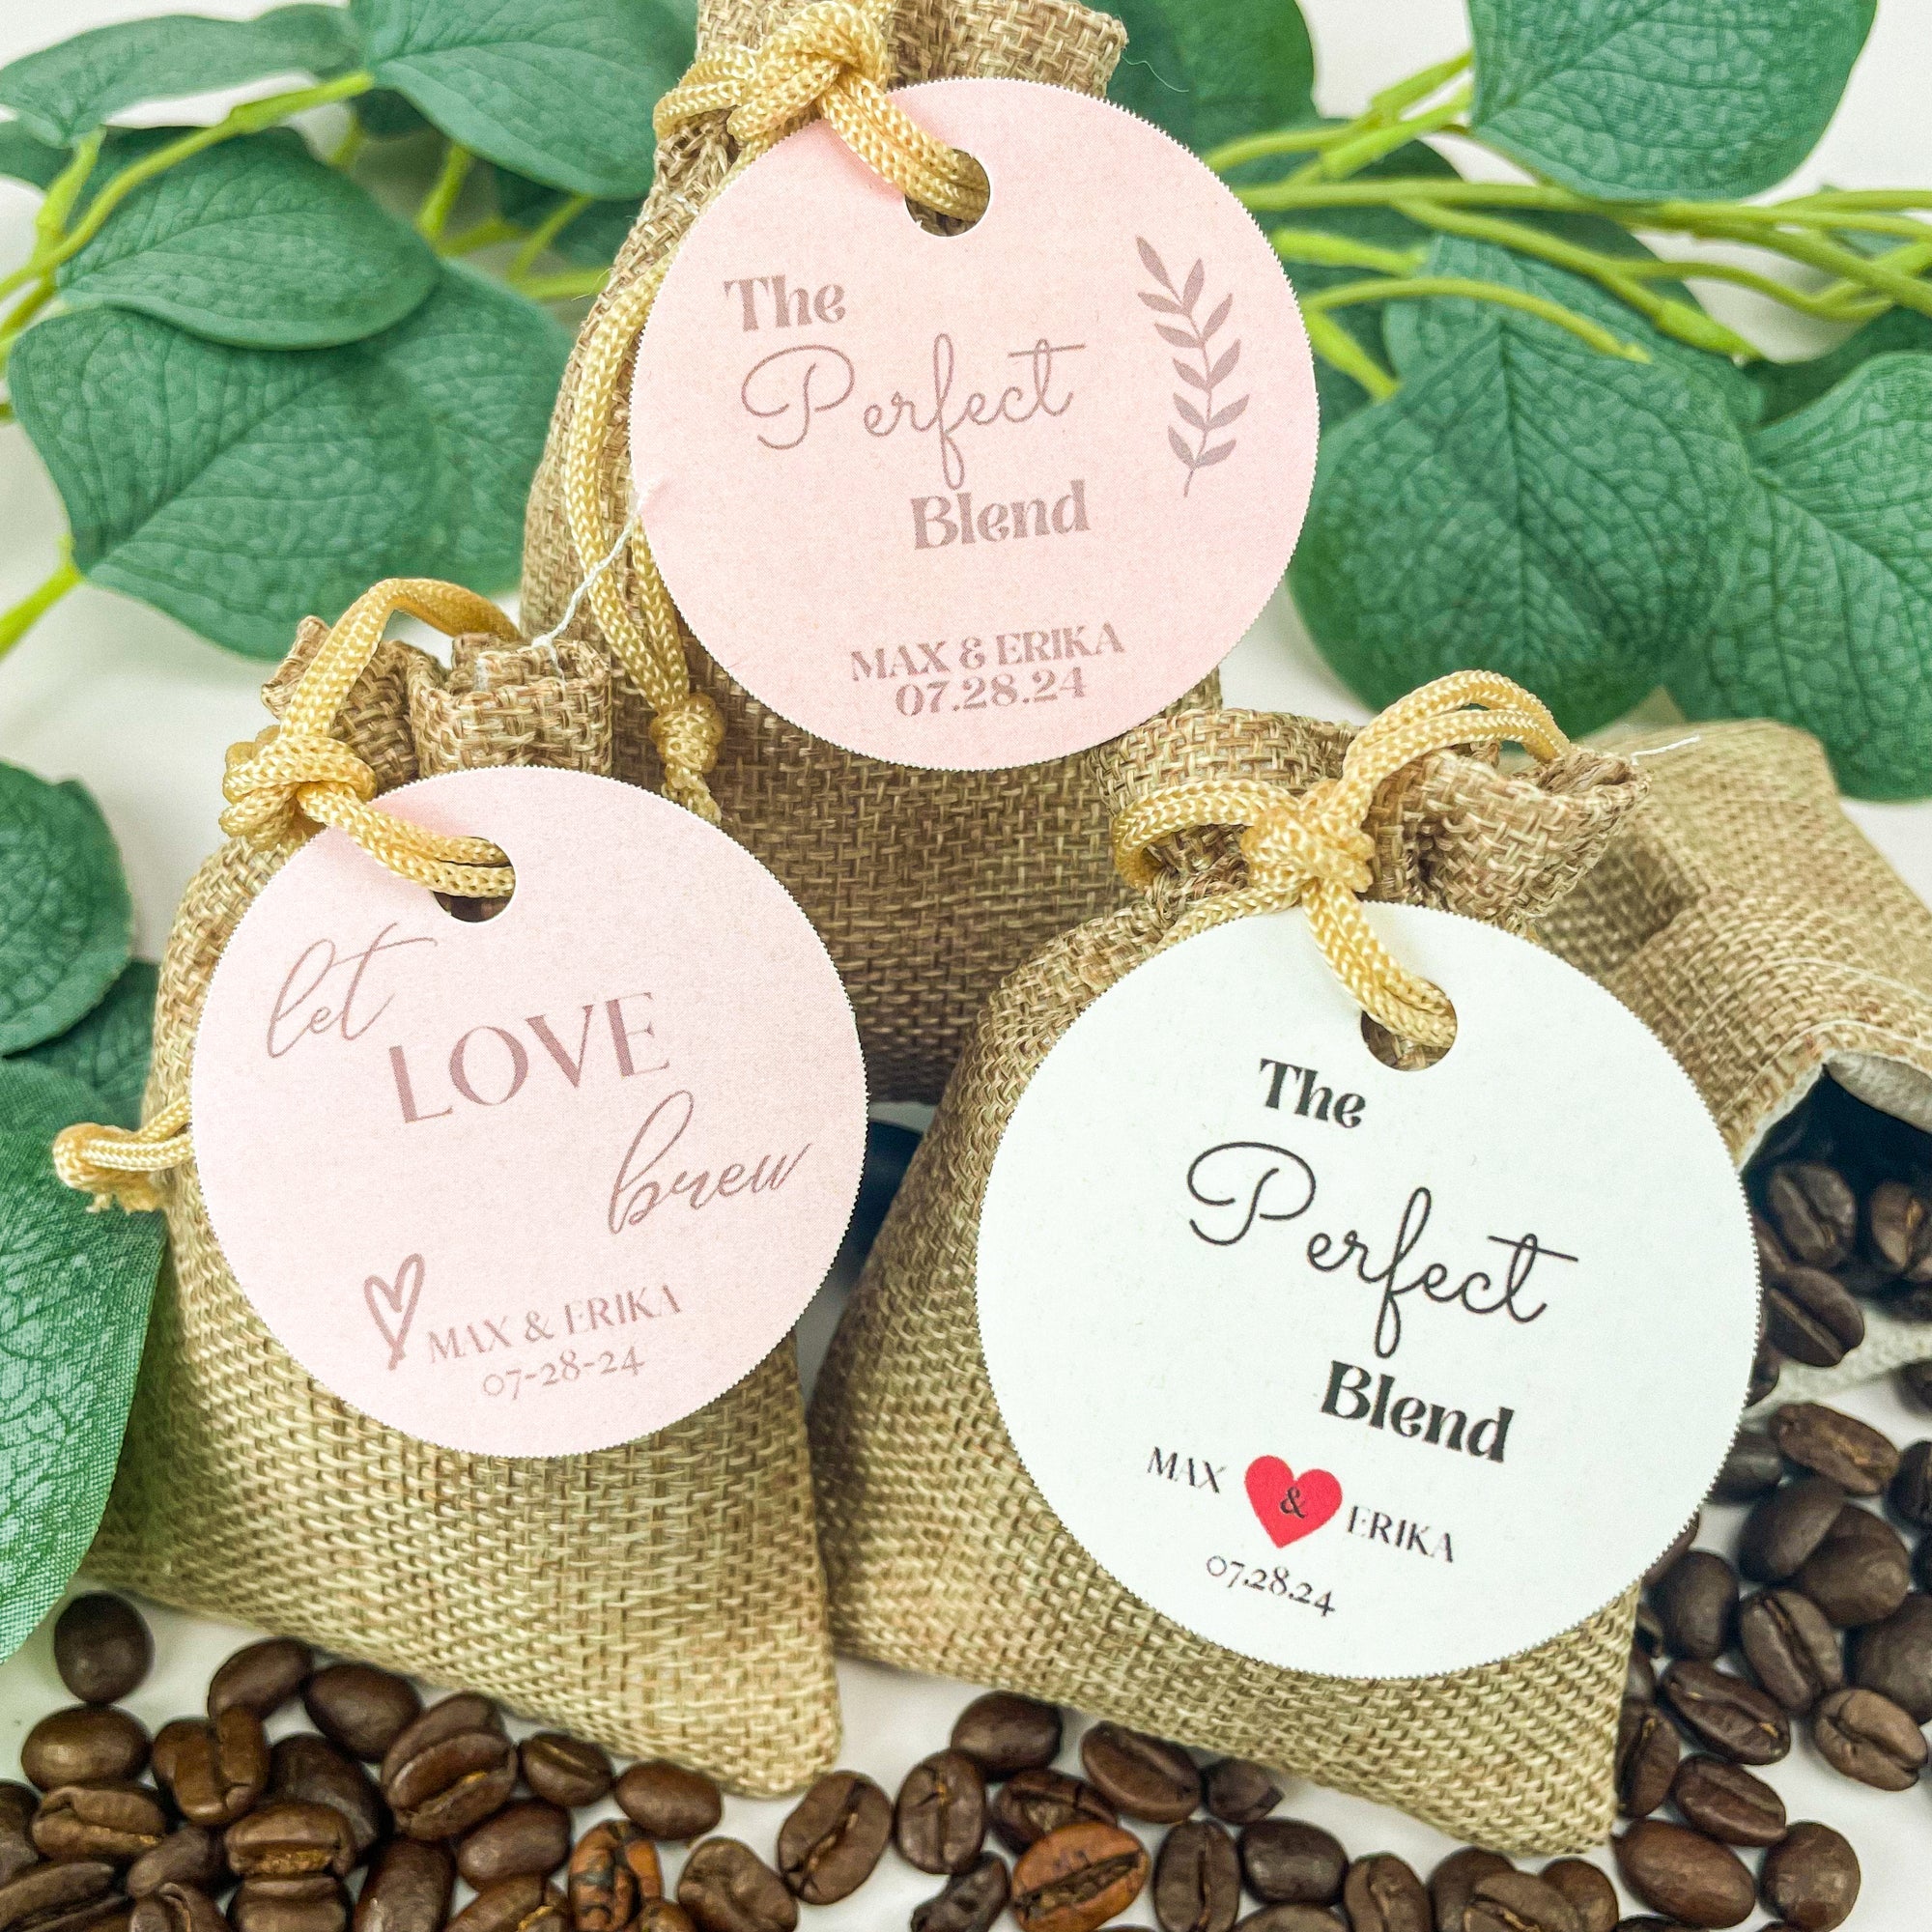 10 Great Fall Wedding Favors for Guests 2014